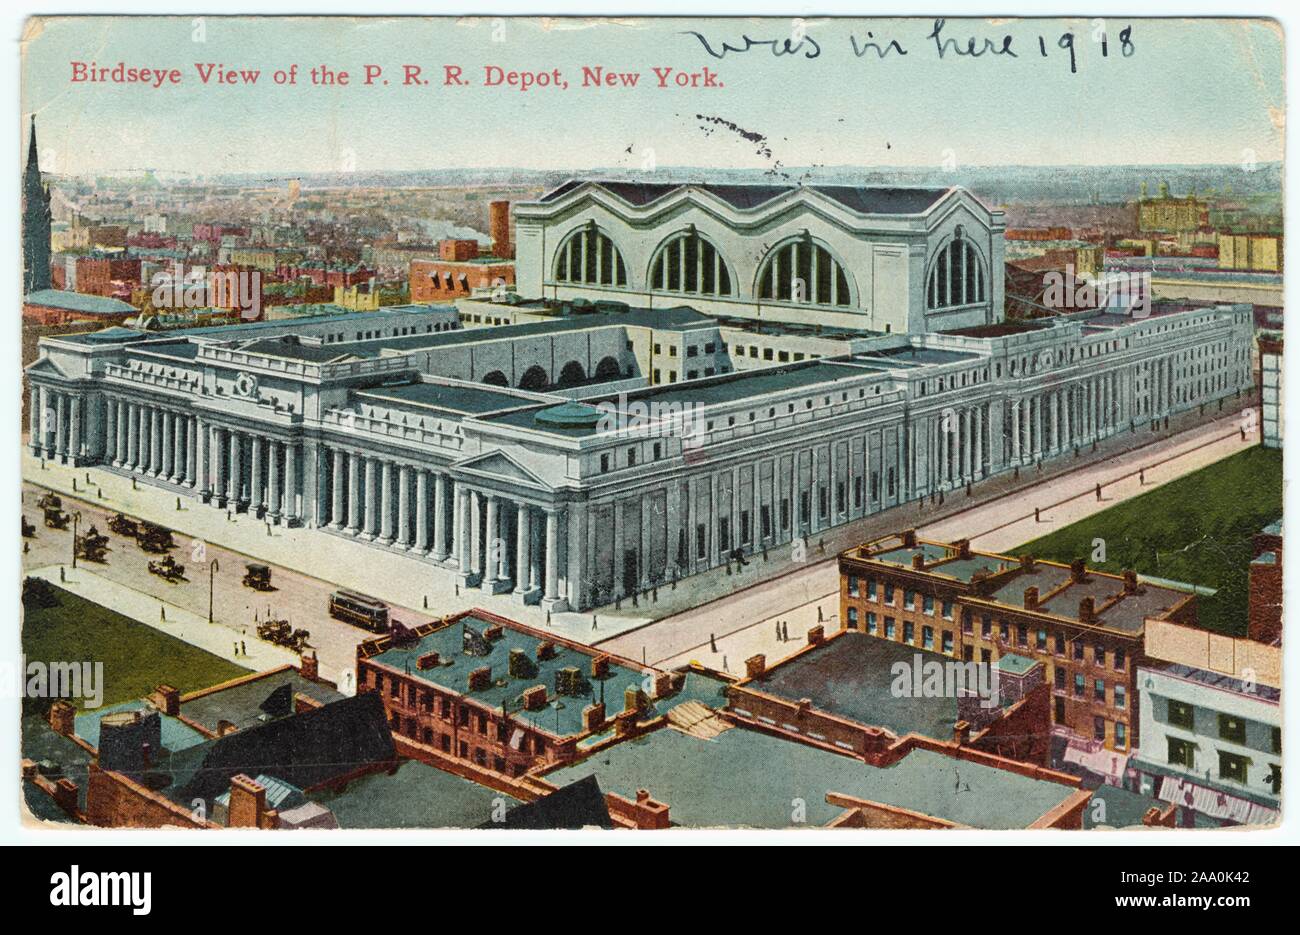 Illustrated postcard of a bird's-eye view of Pennsylvania Railroad Station, New York City, published by Success Postal Card Co, 1910. From the New York Public Library. () Stock Photo